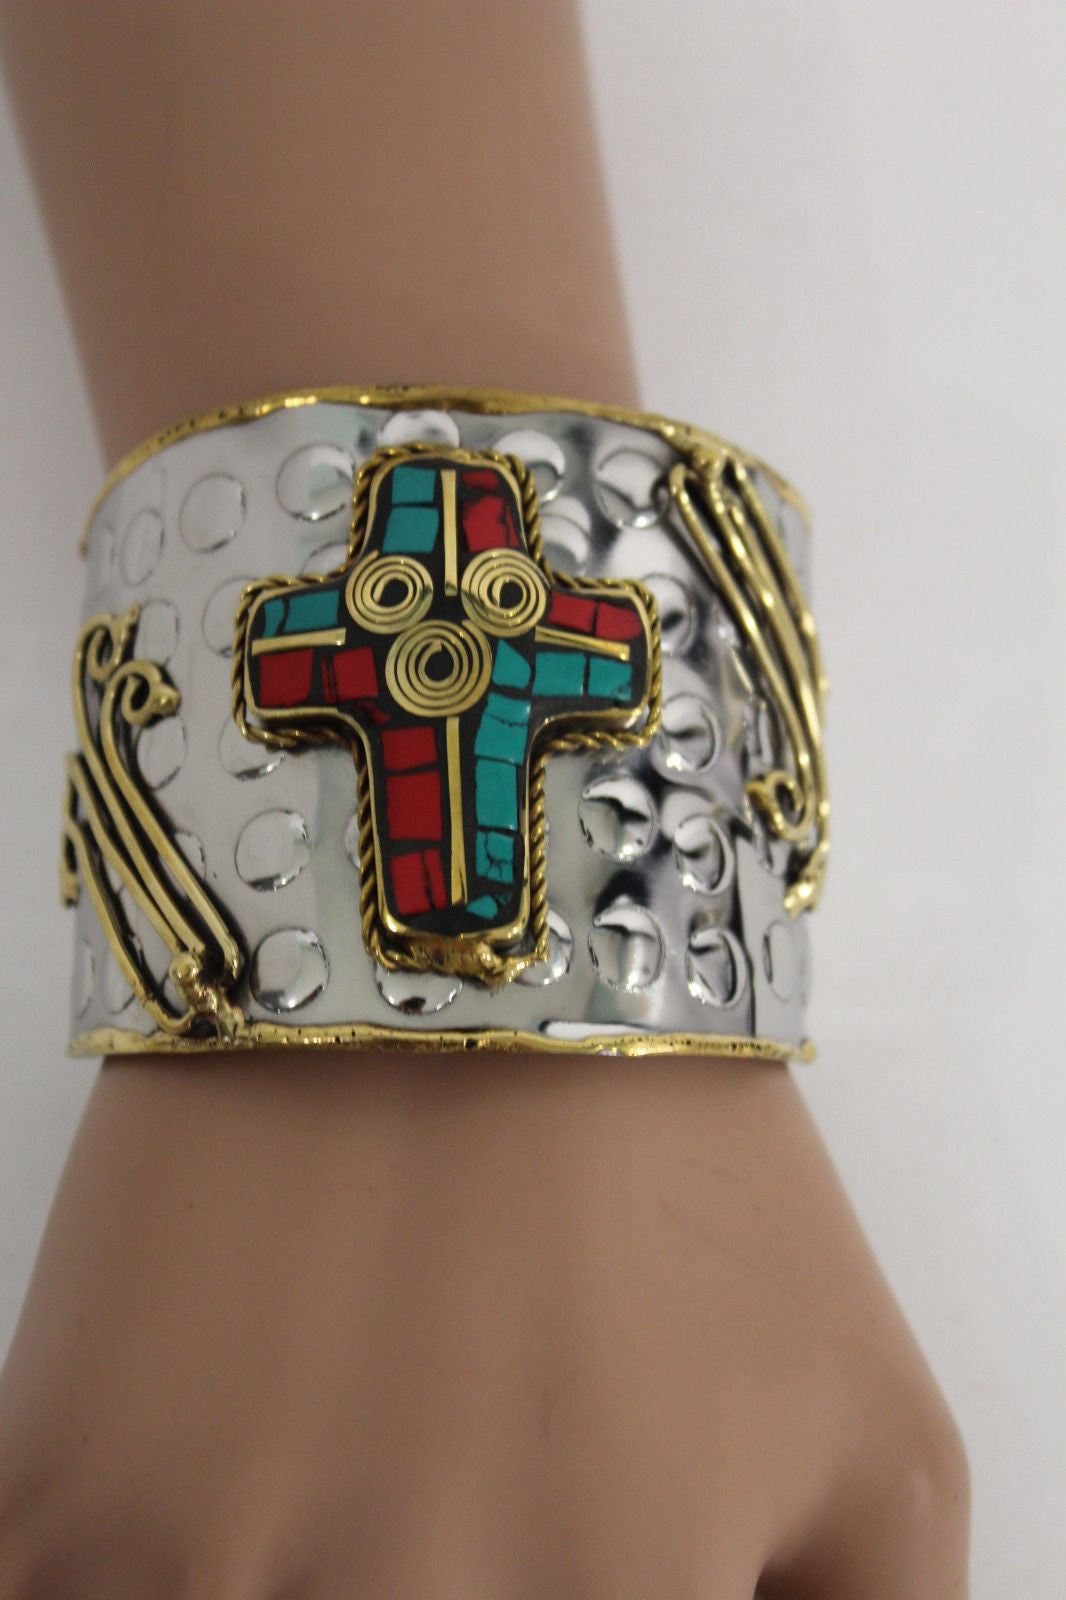 Silver Metal Cuff Bracelet Big Cross Blue Red Gold Women Fashion Jewelry Accessories - alwaystyle4you - 1